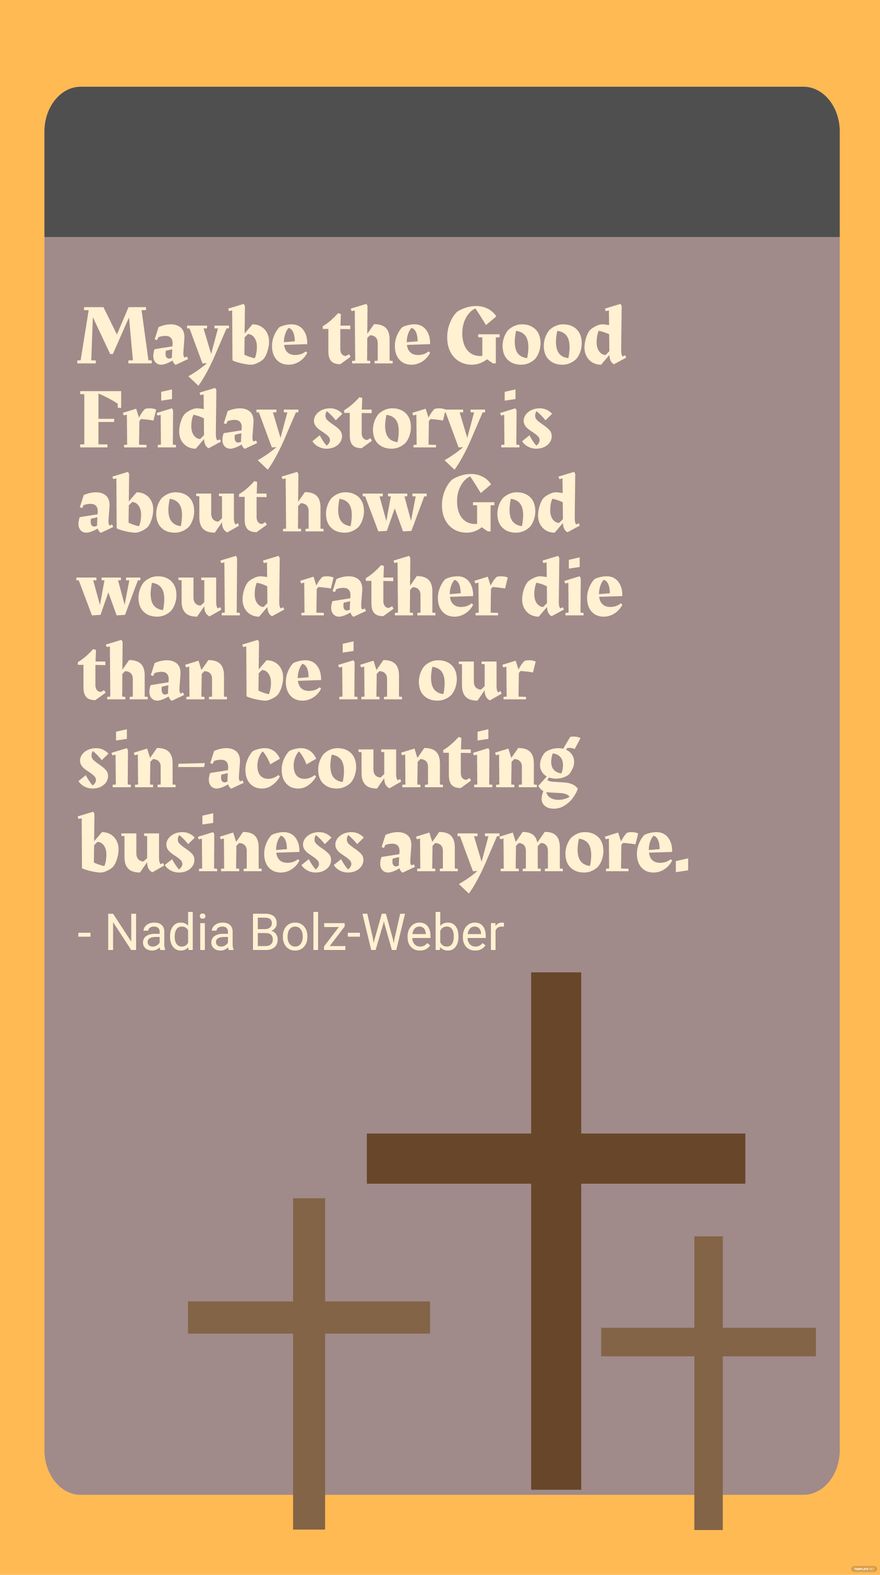 Nadia Bolz-Weber - Maybe the Good Friday story is about how God would rather die than be in our sin-accounting business anymore.